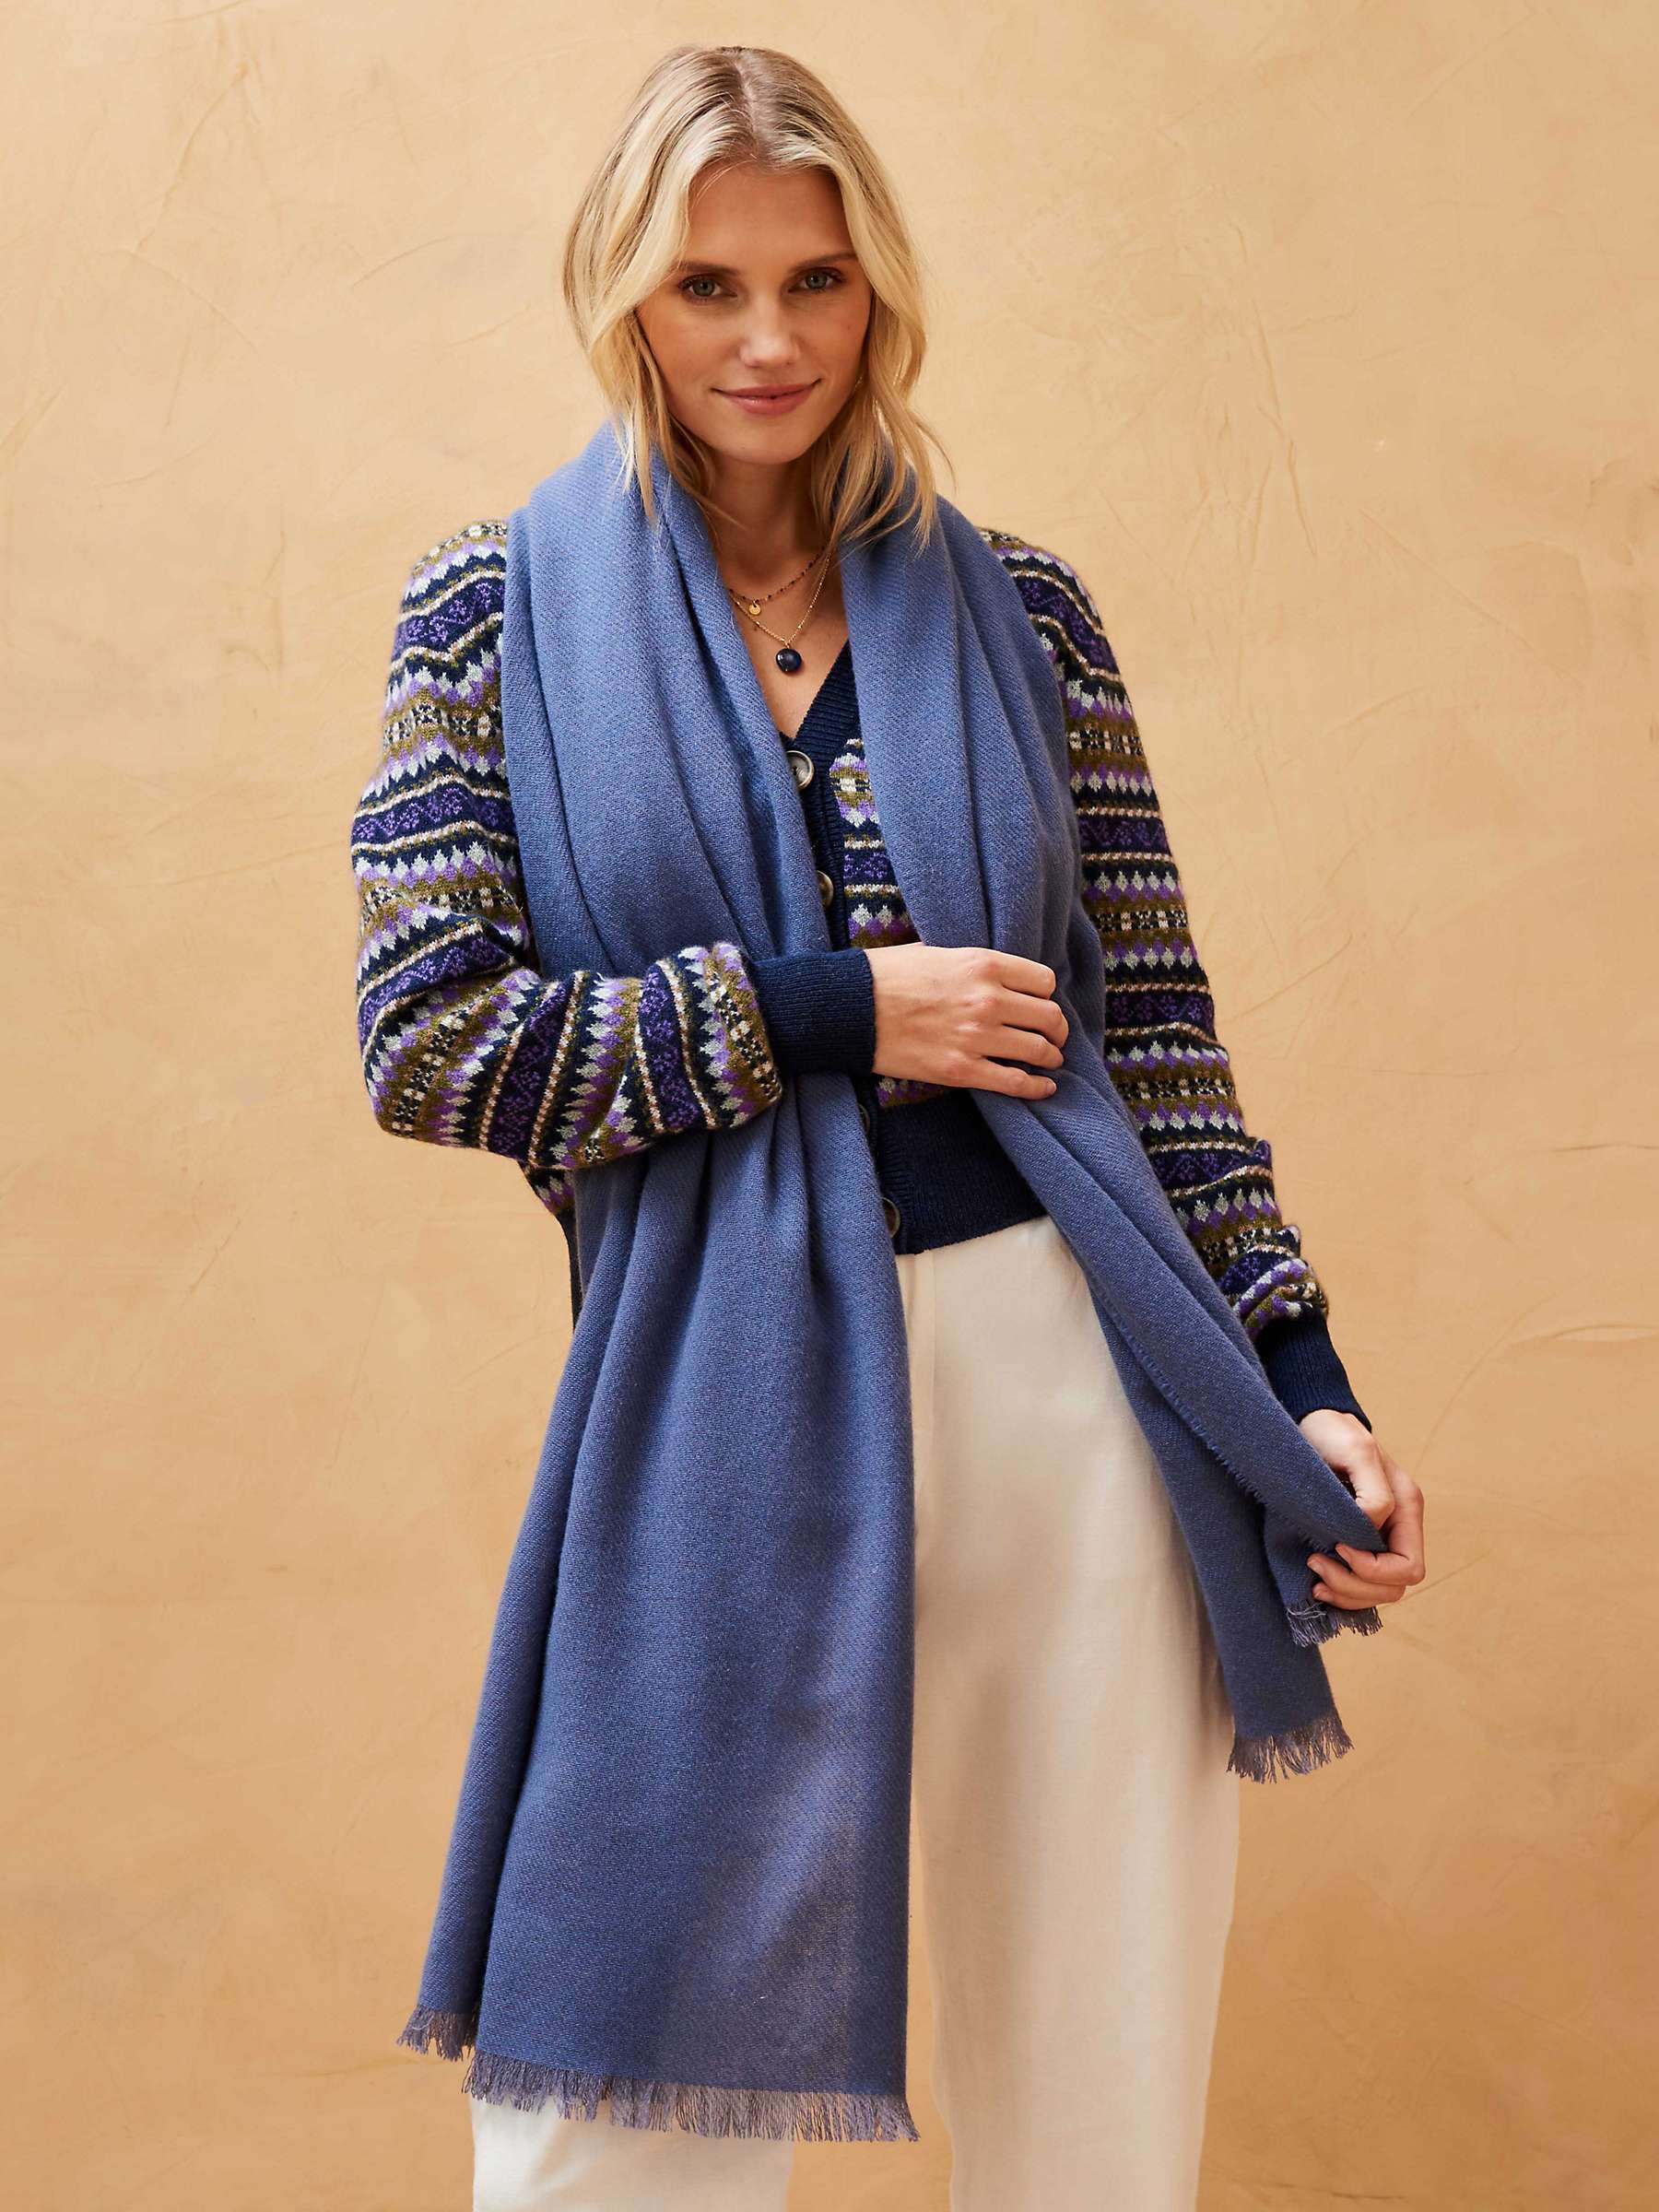 Buy Brora Cashmere Stole Scarf Online at johnlewis.com